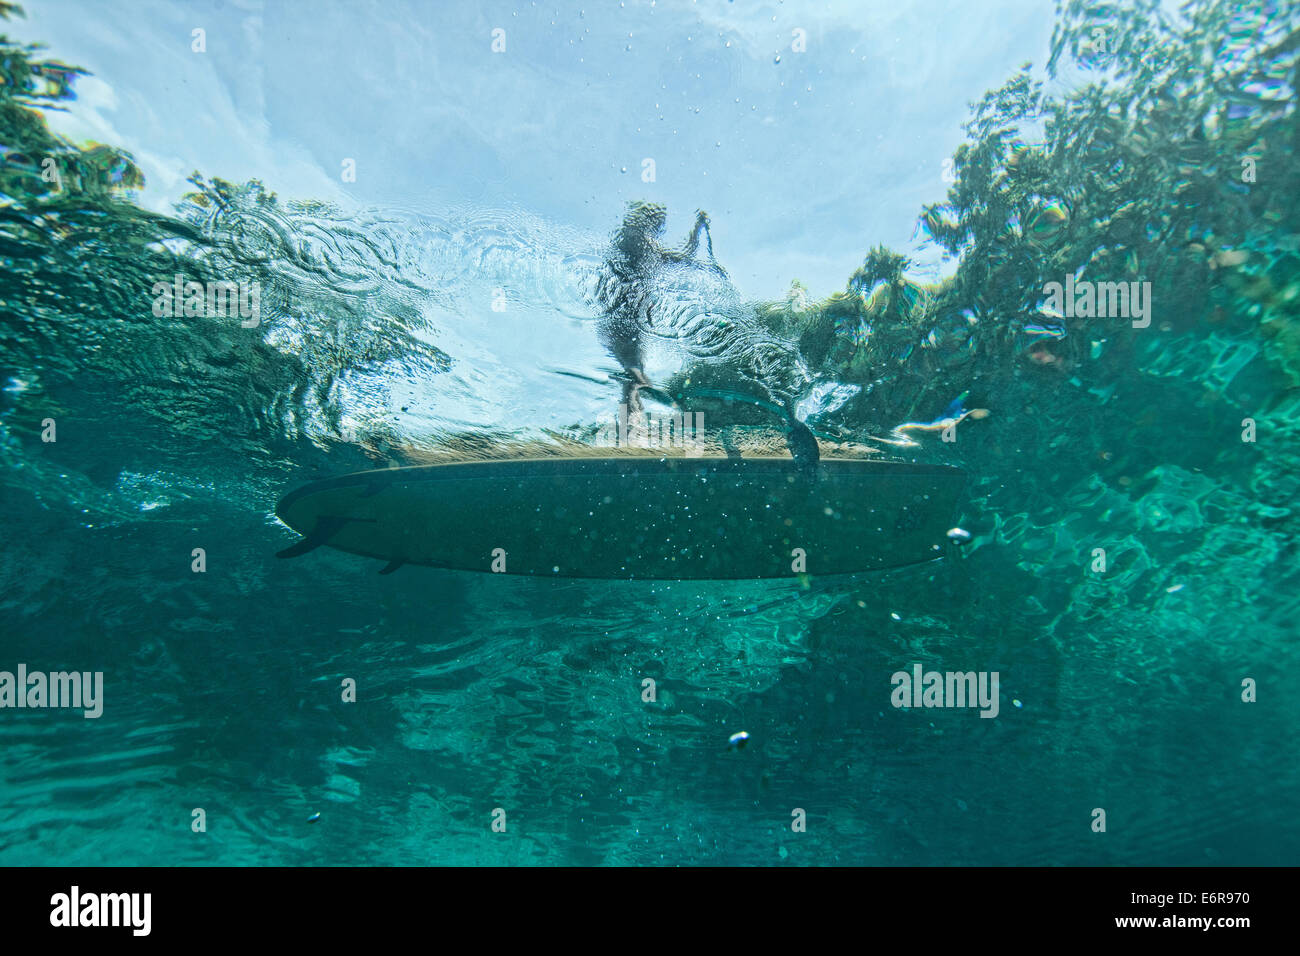 Underwater Image with the photographer looking up at the stand up paddle board on the surface in crystal clear water Stock Photo